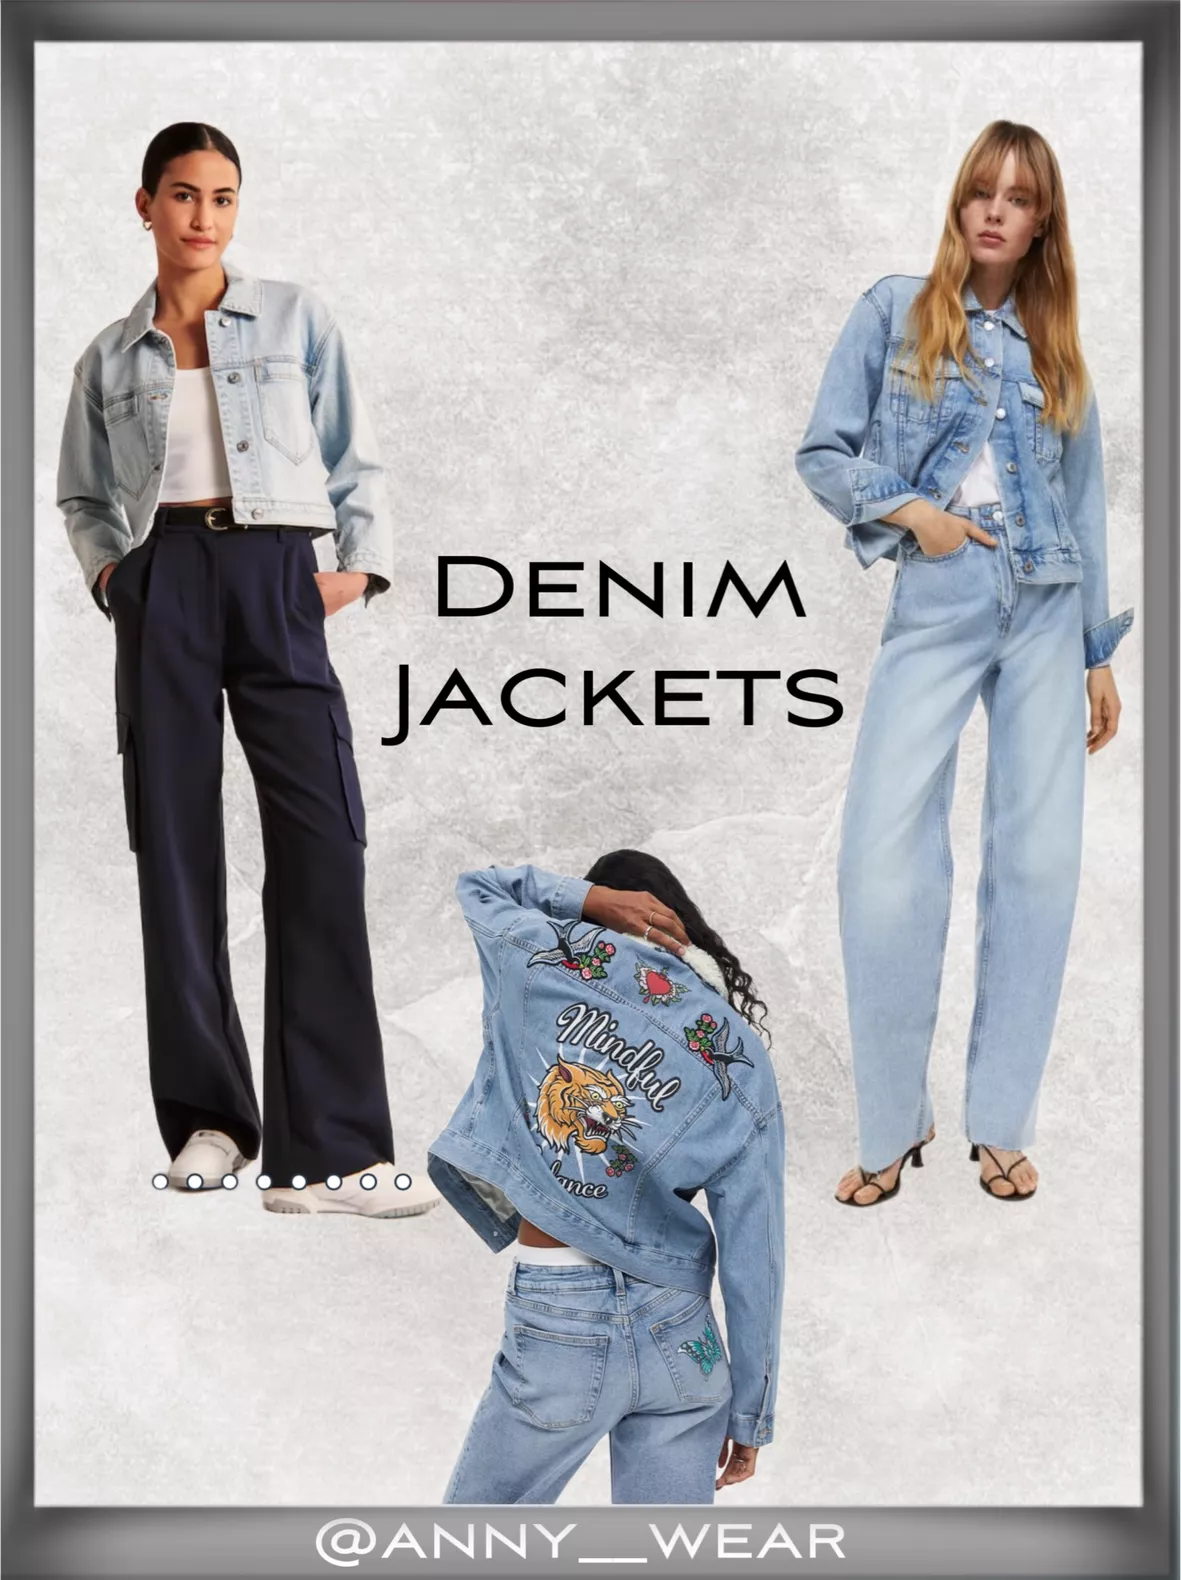 just a little more denim on denim outfit inspo for ya